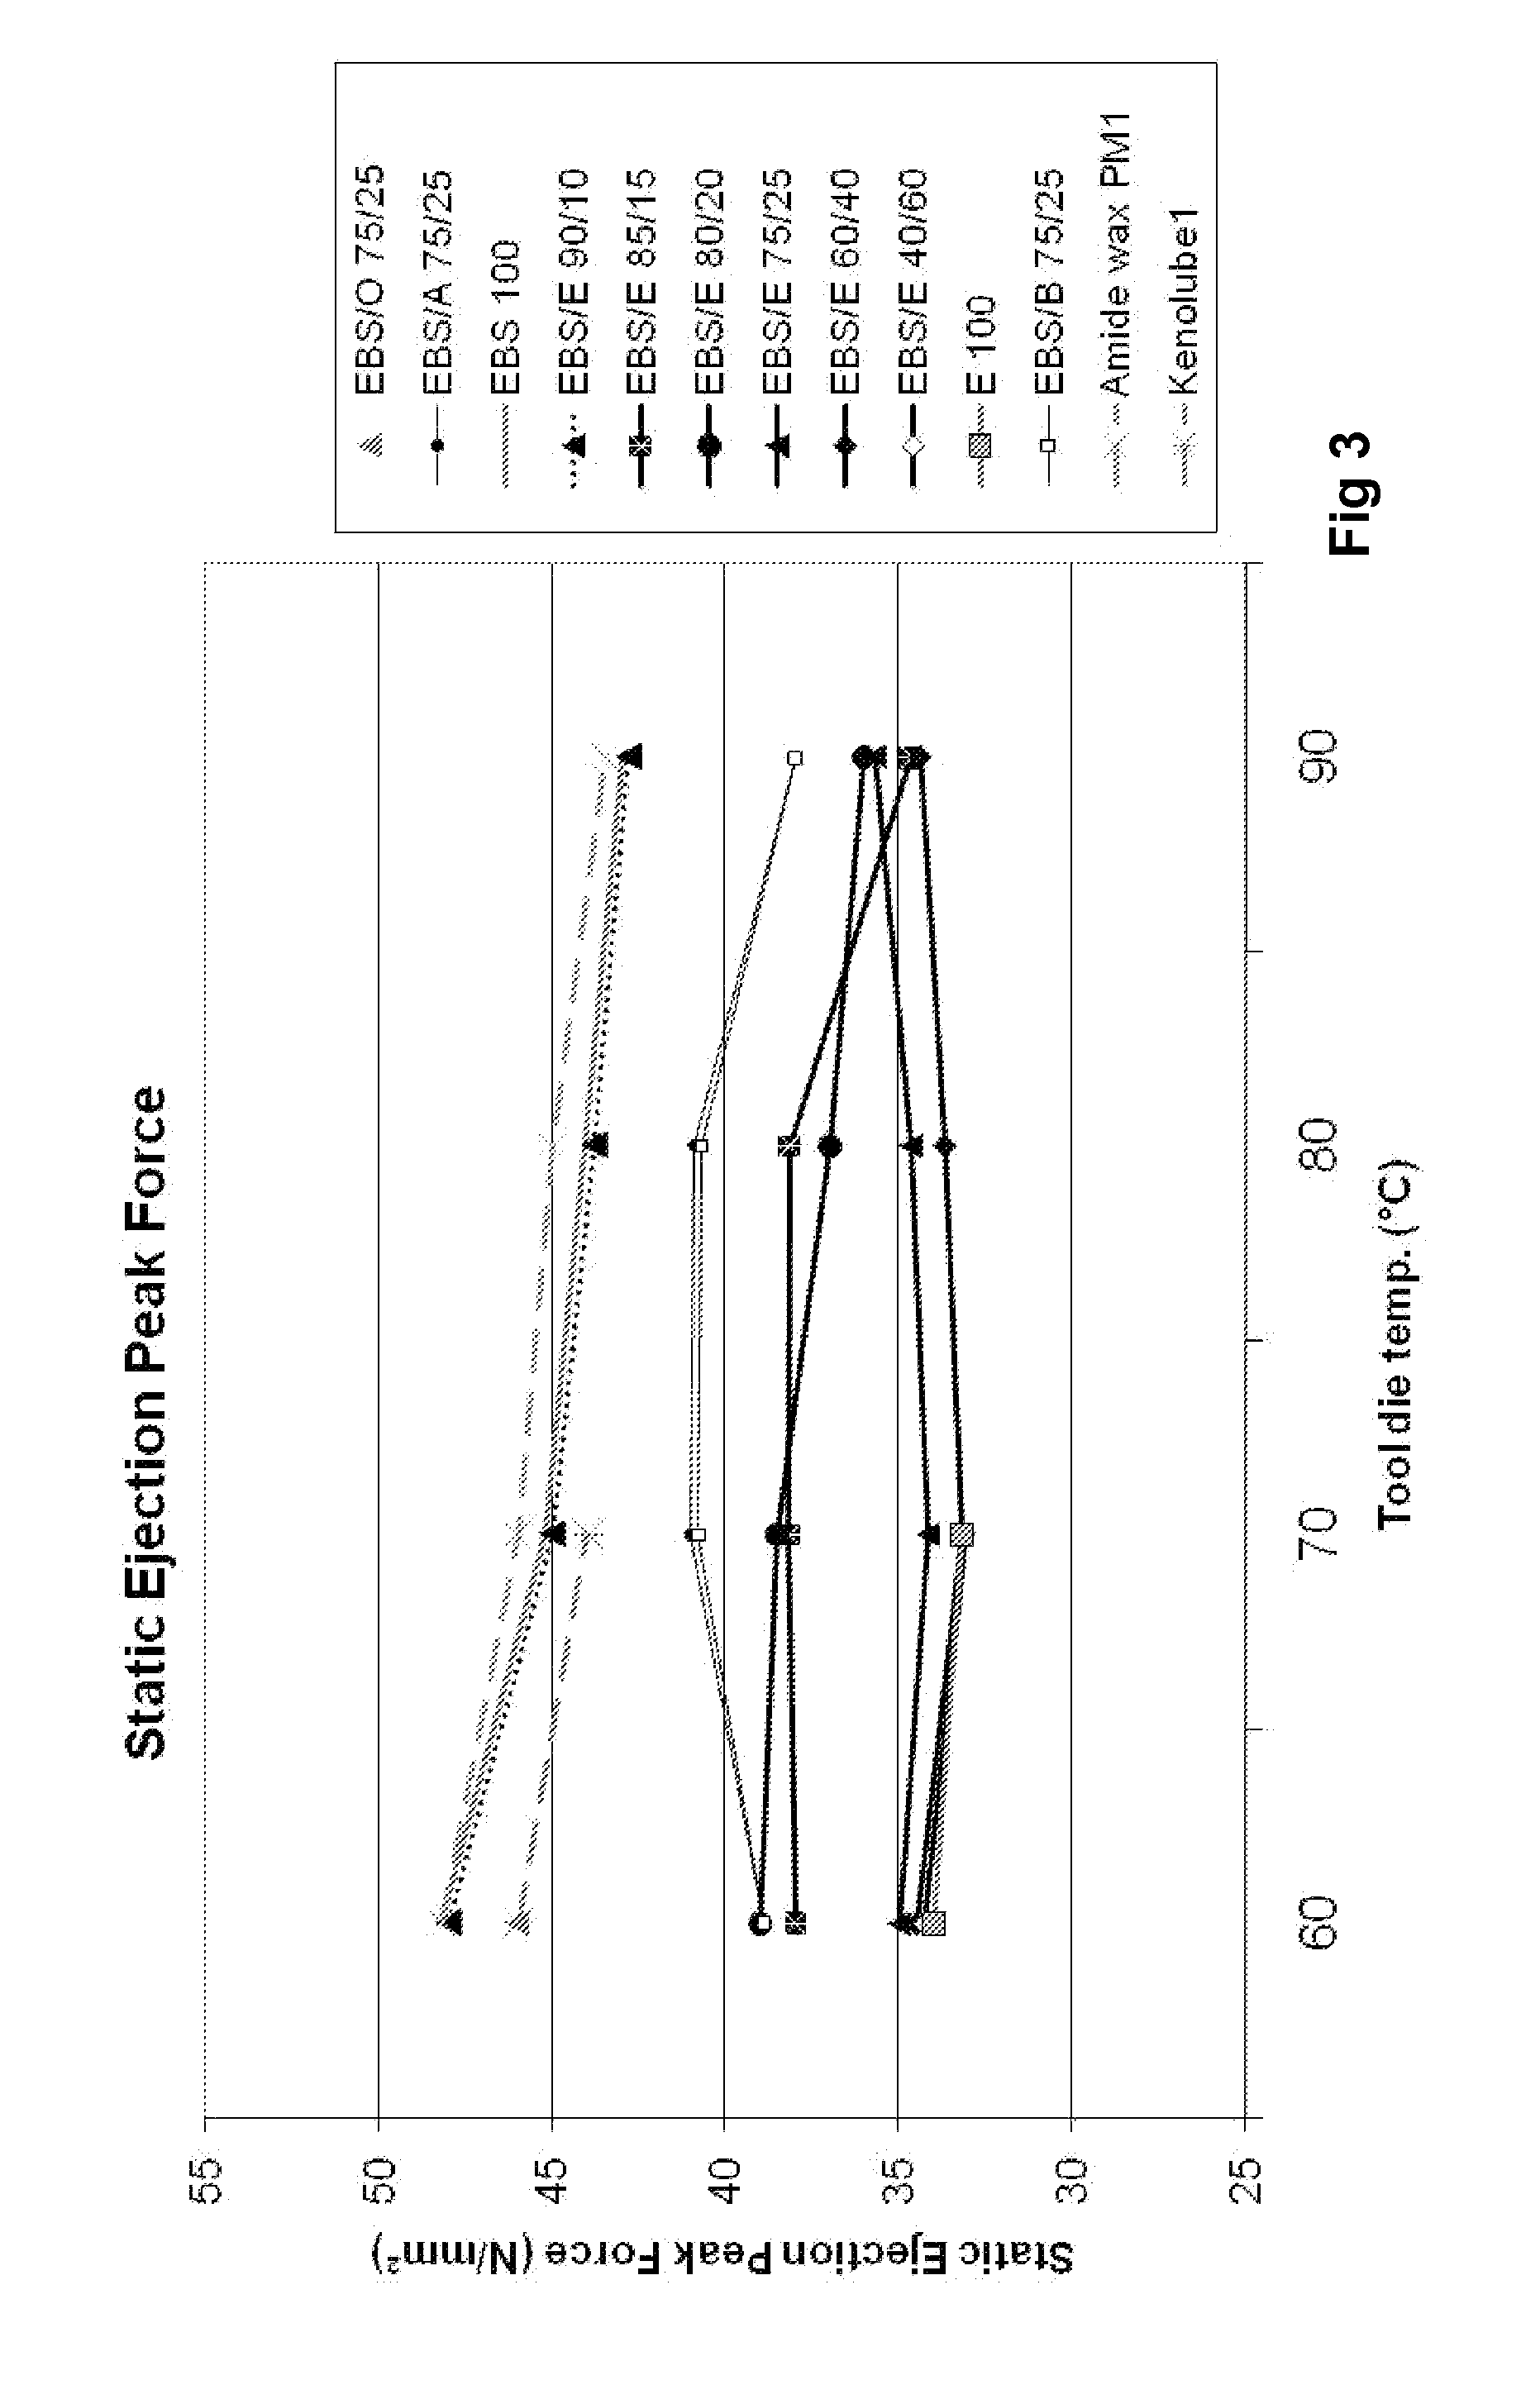 Lubricant for powder metallurgical compositions